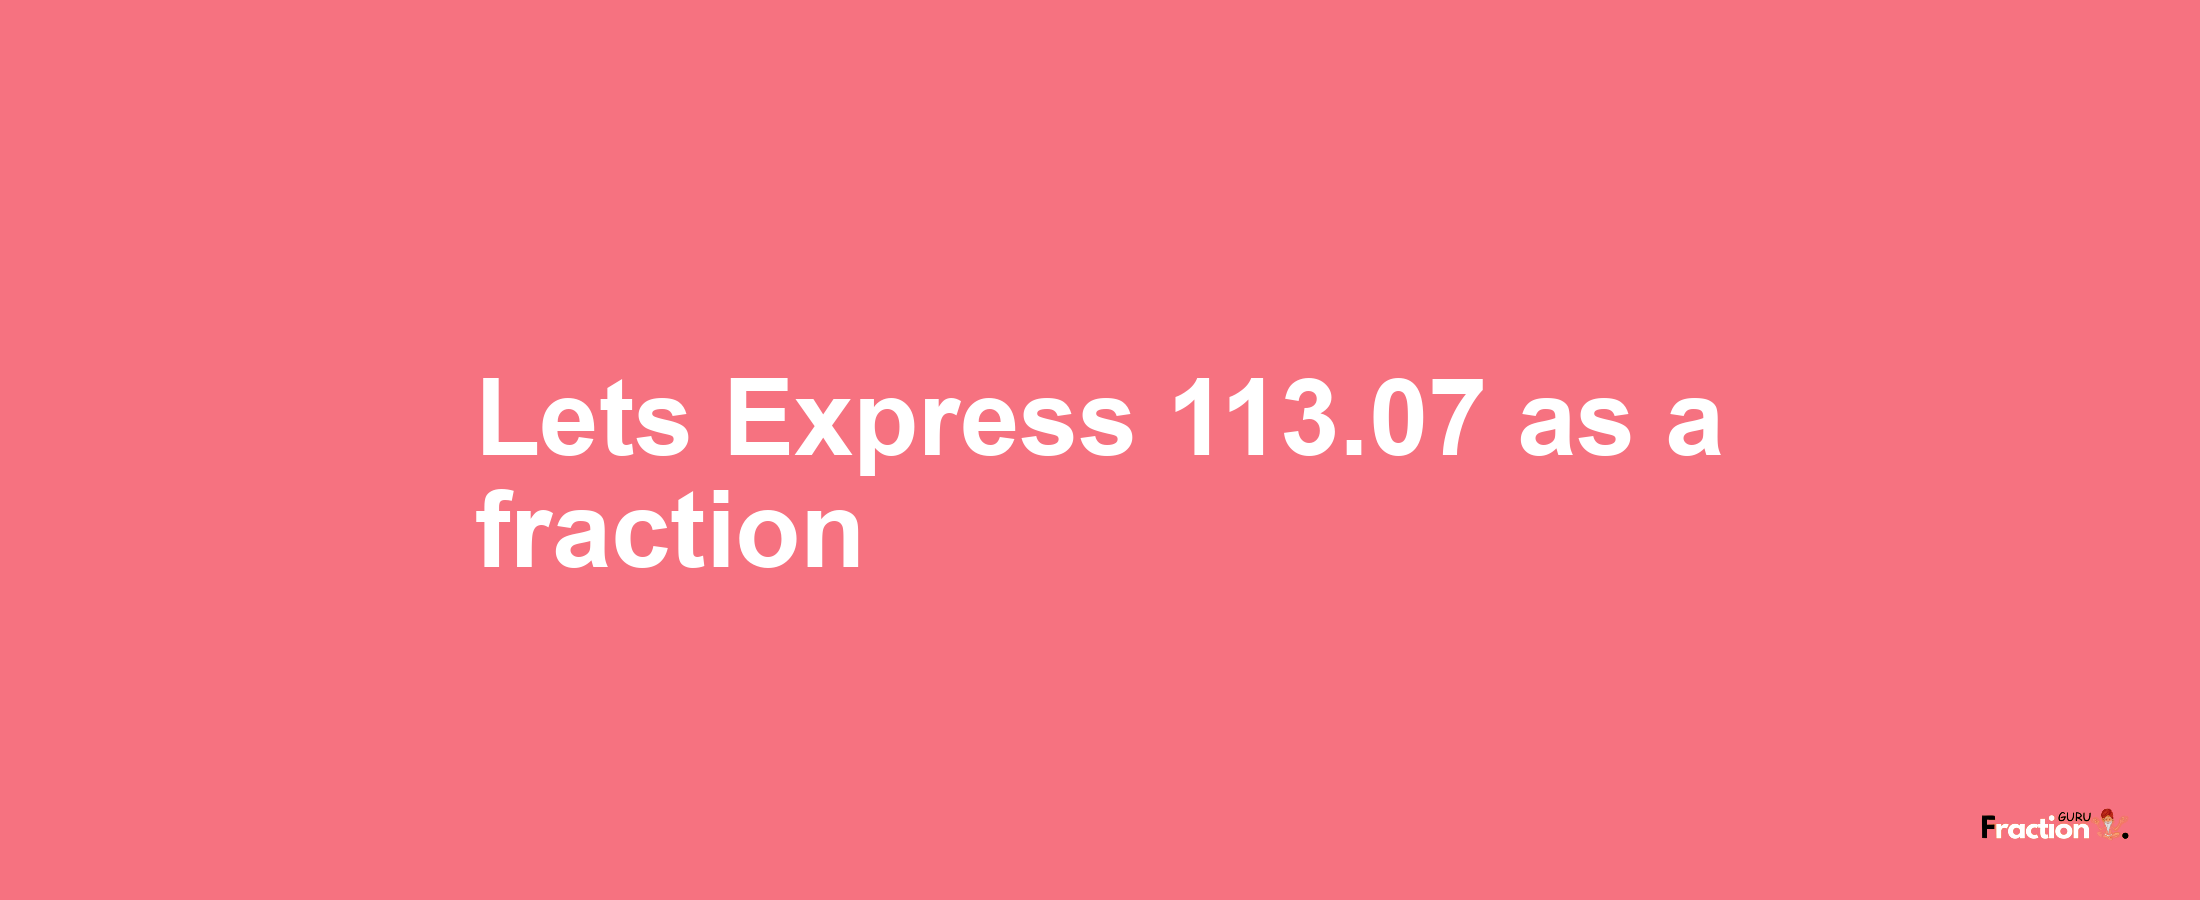 Lets Express 113.07 as afraction